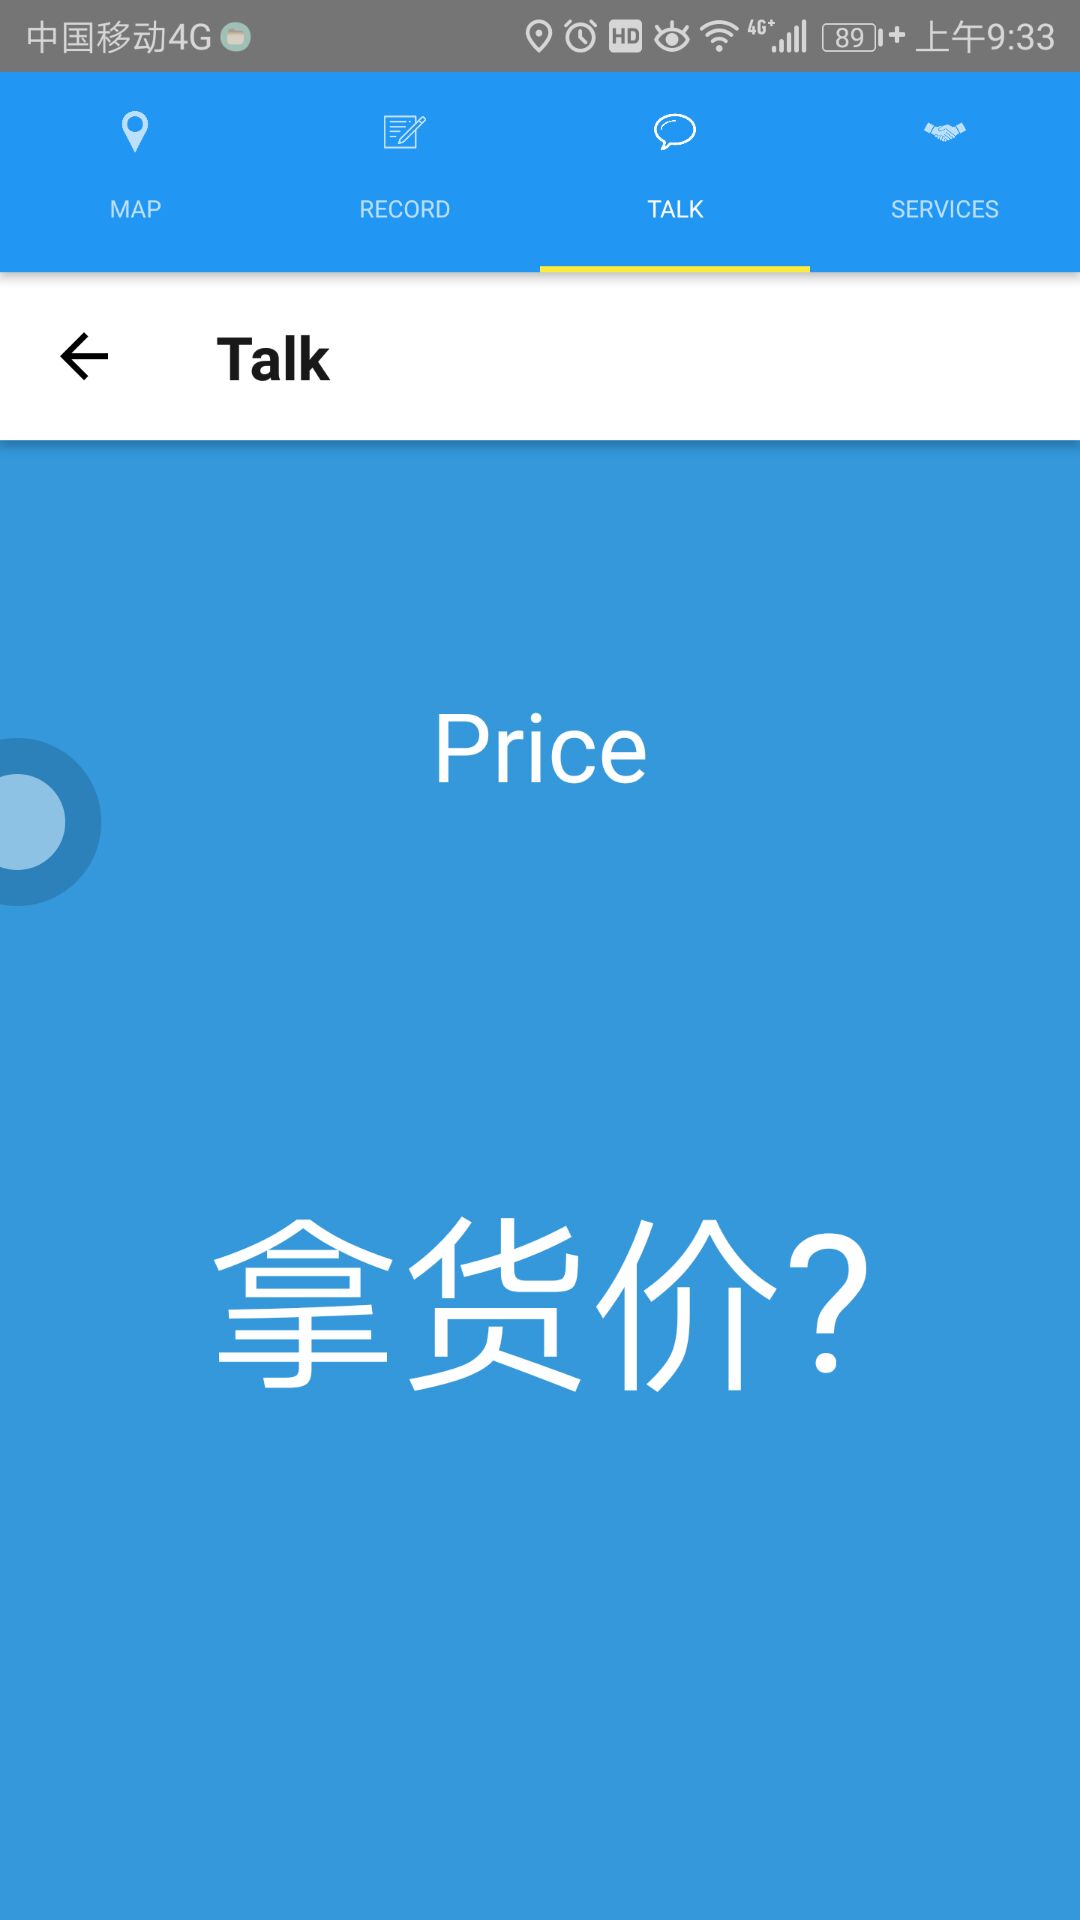 Yiwu market guide App: ask for price